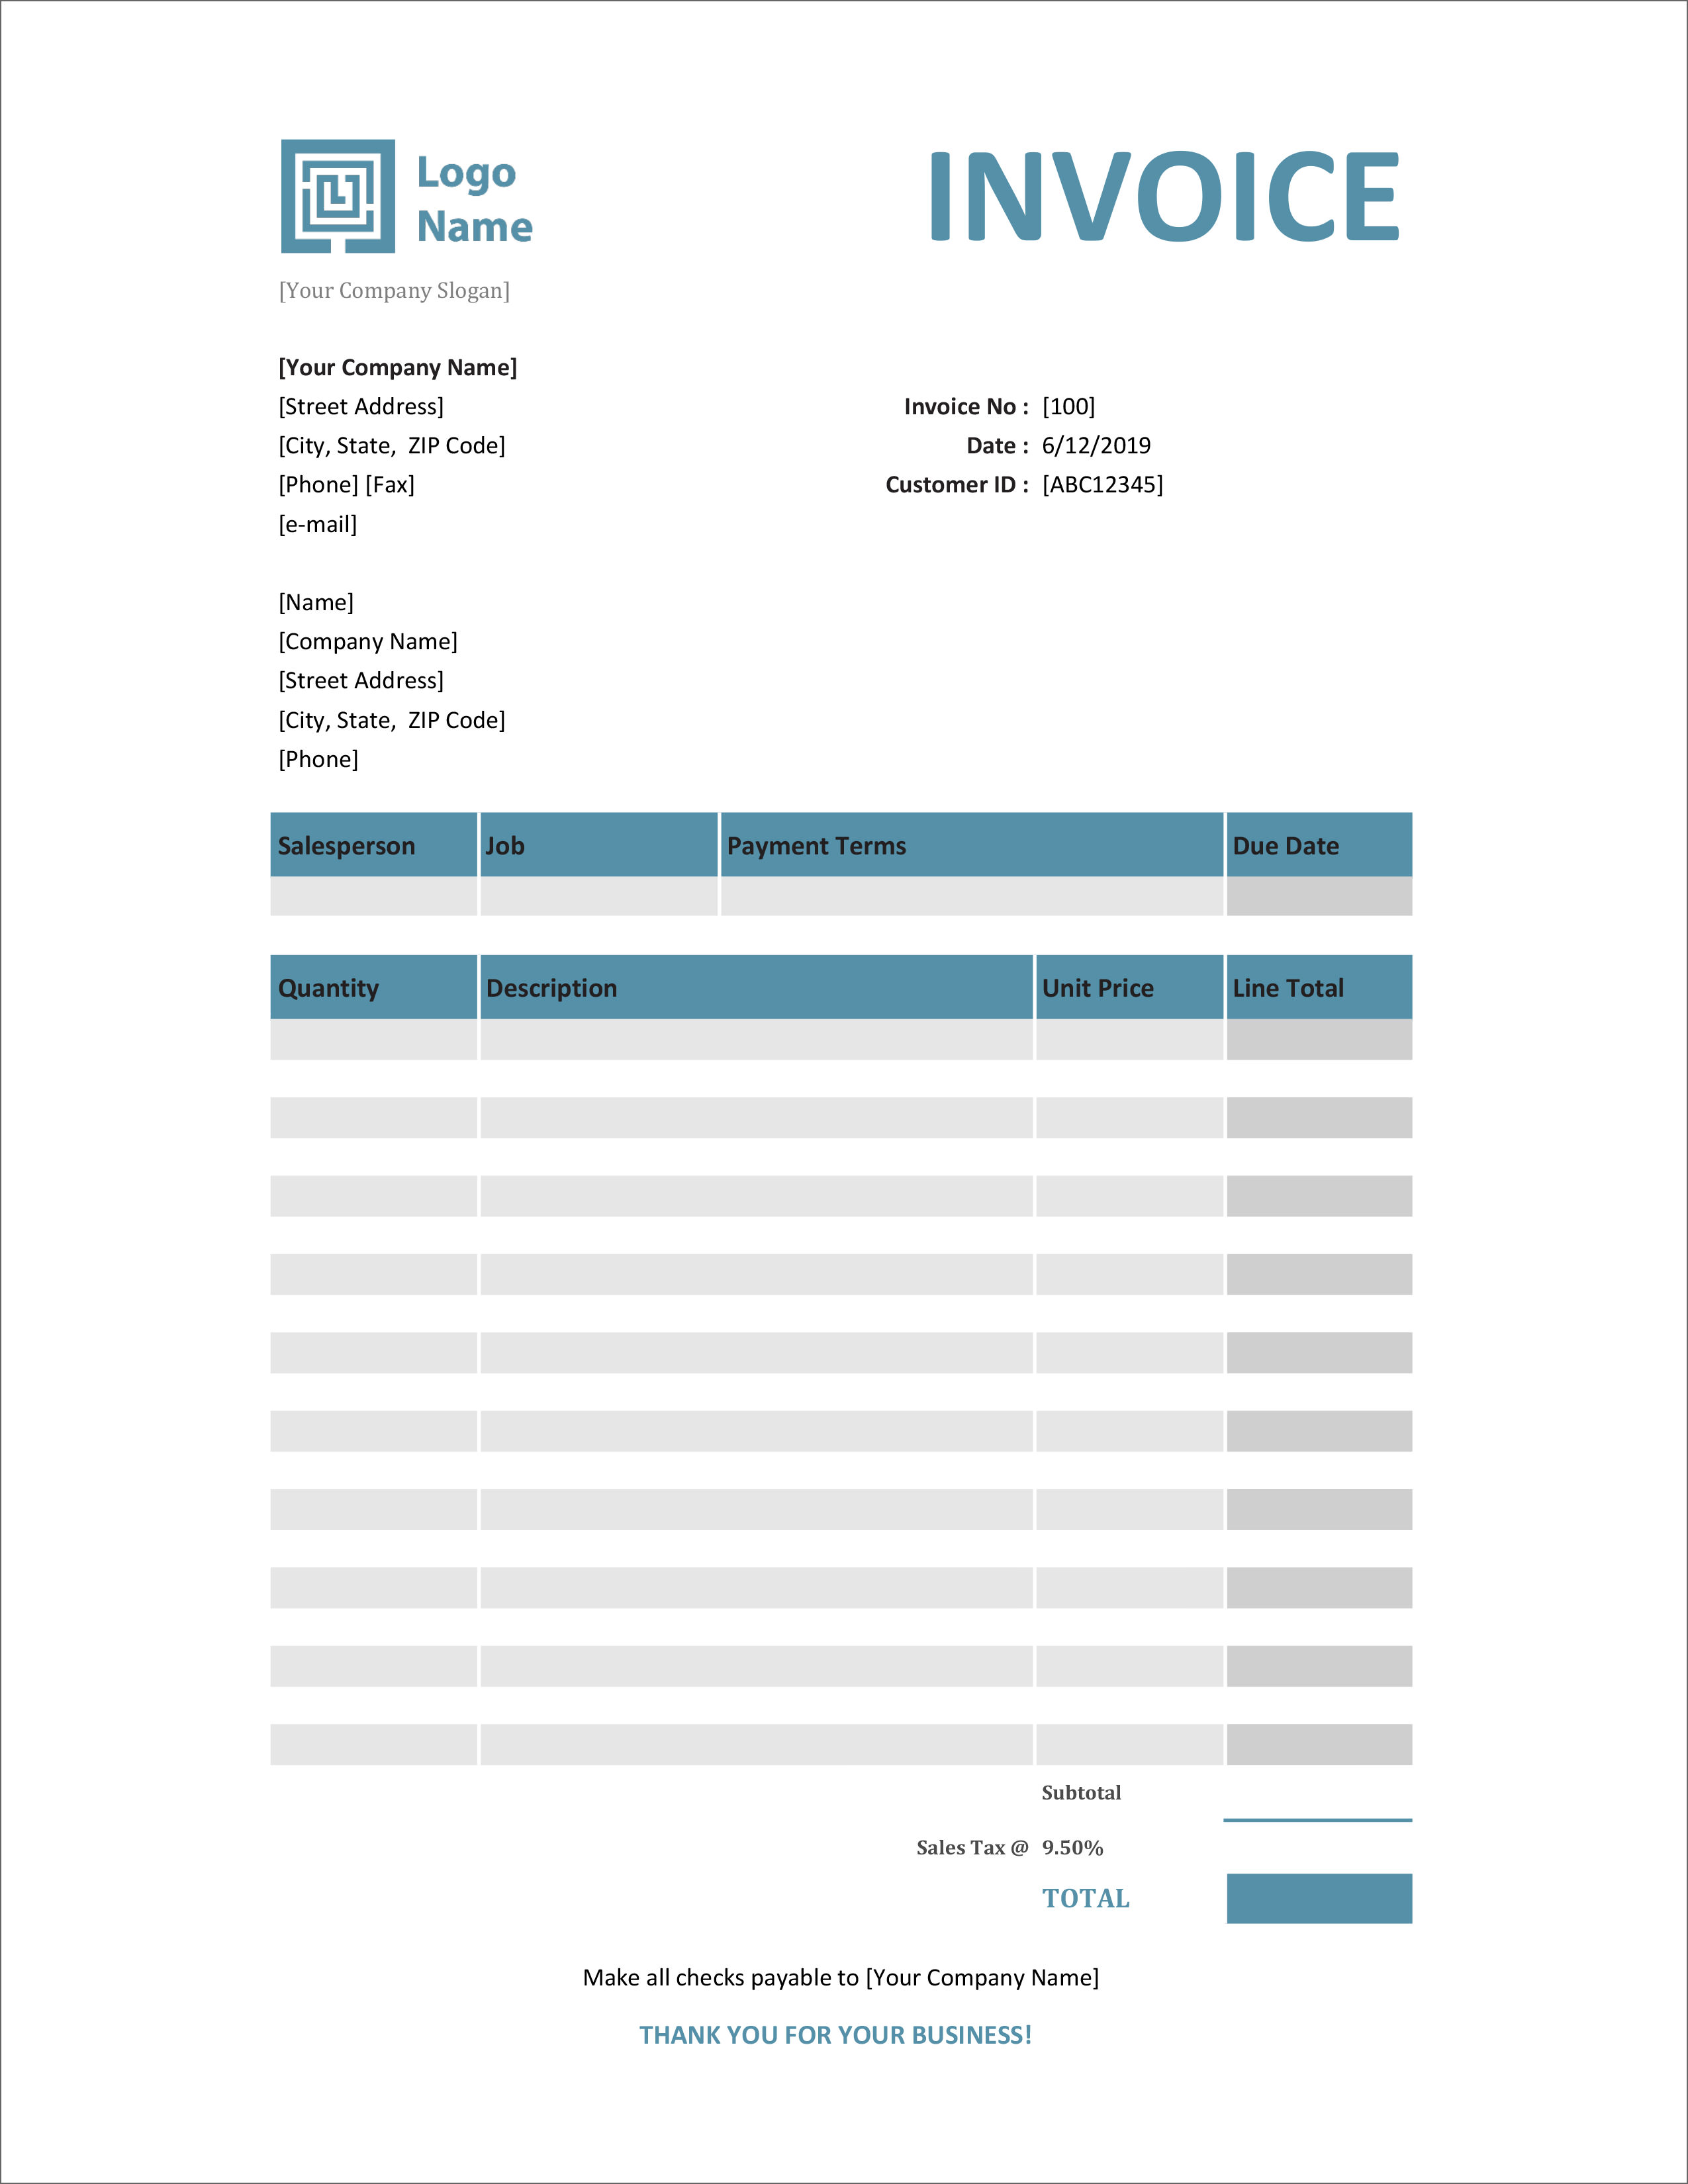 32 Free Invoice Templates In Microsoft Excel And DOCX Formats